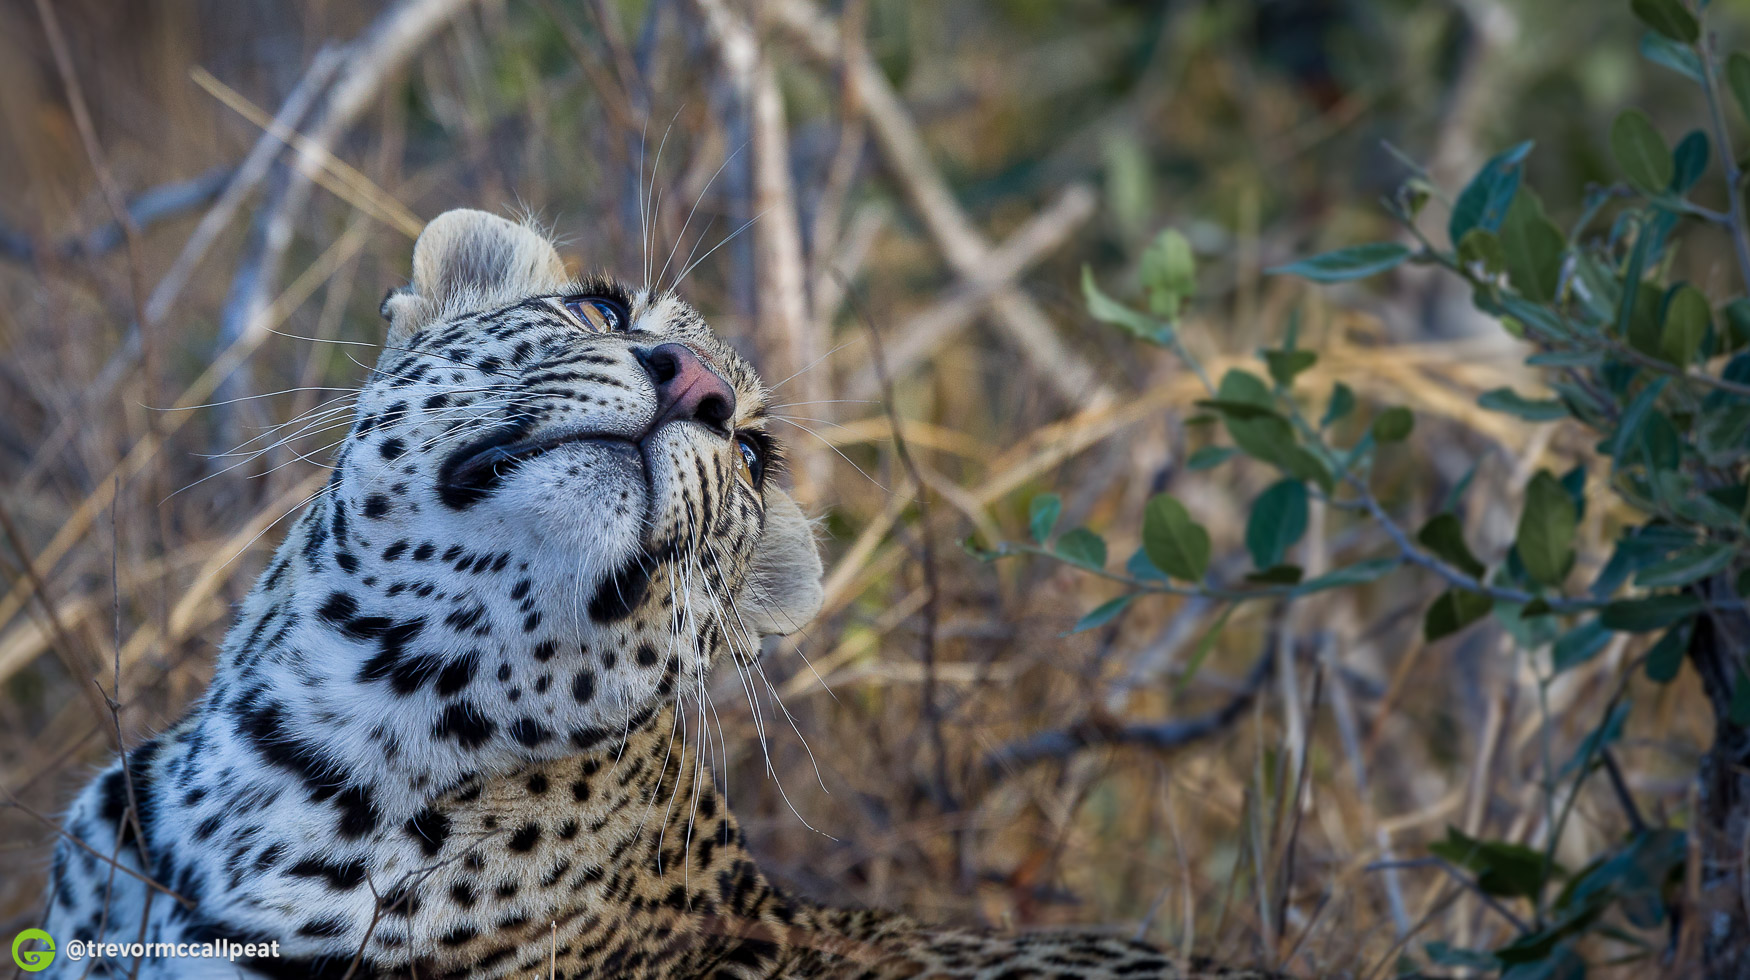 The Life of a Leopard